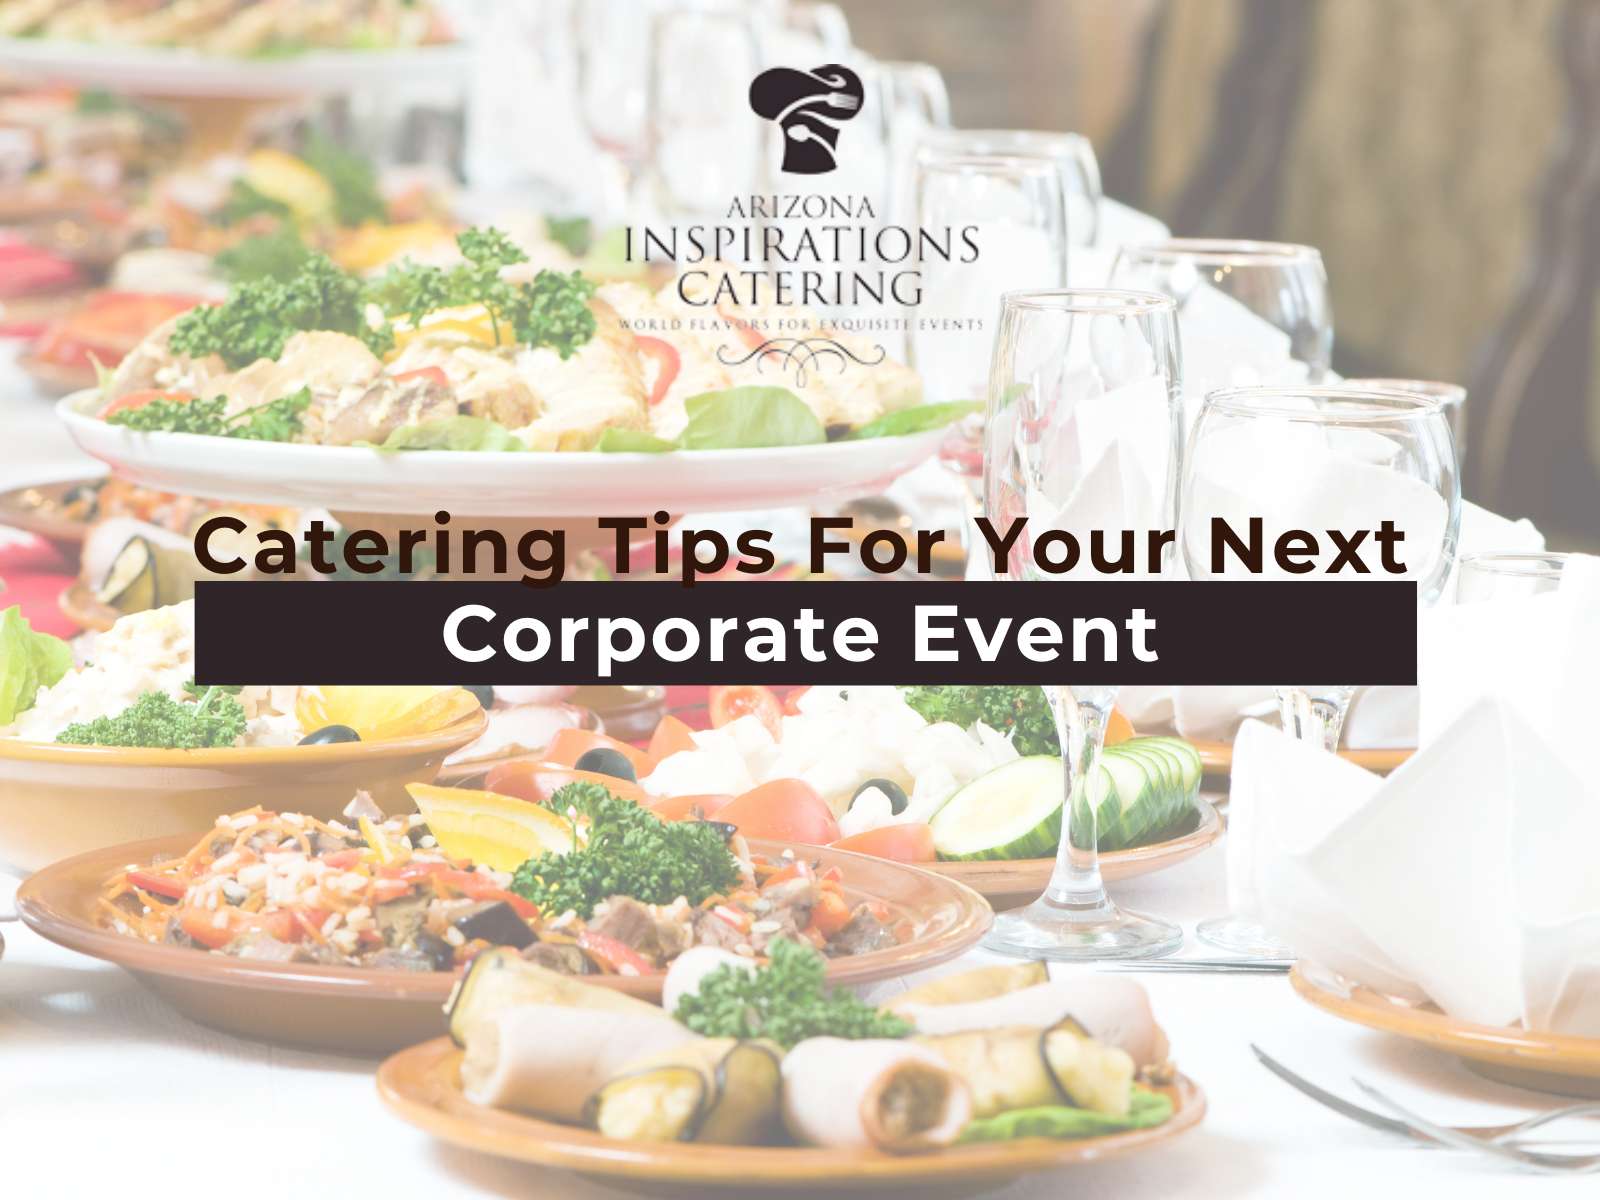 Catering Tips For Your Next Corporate Event